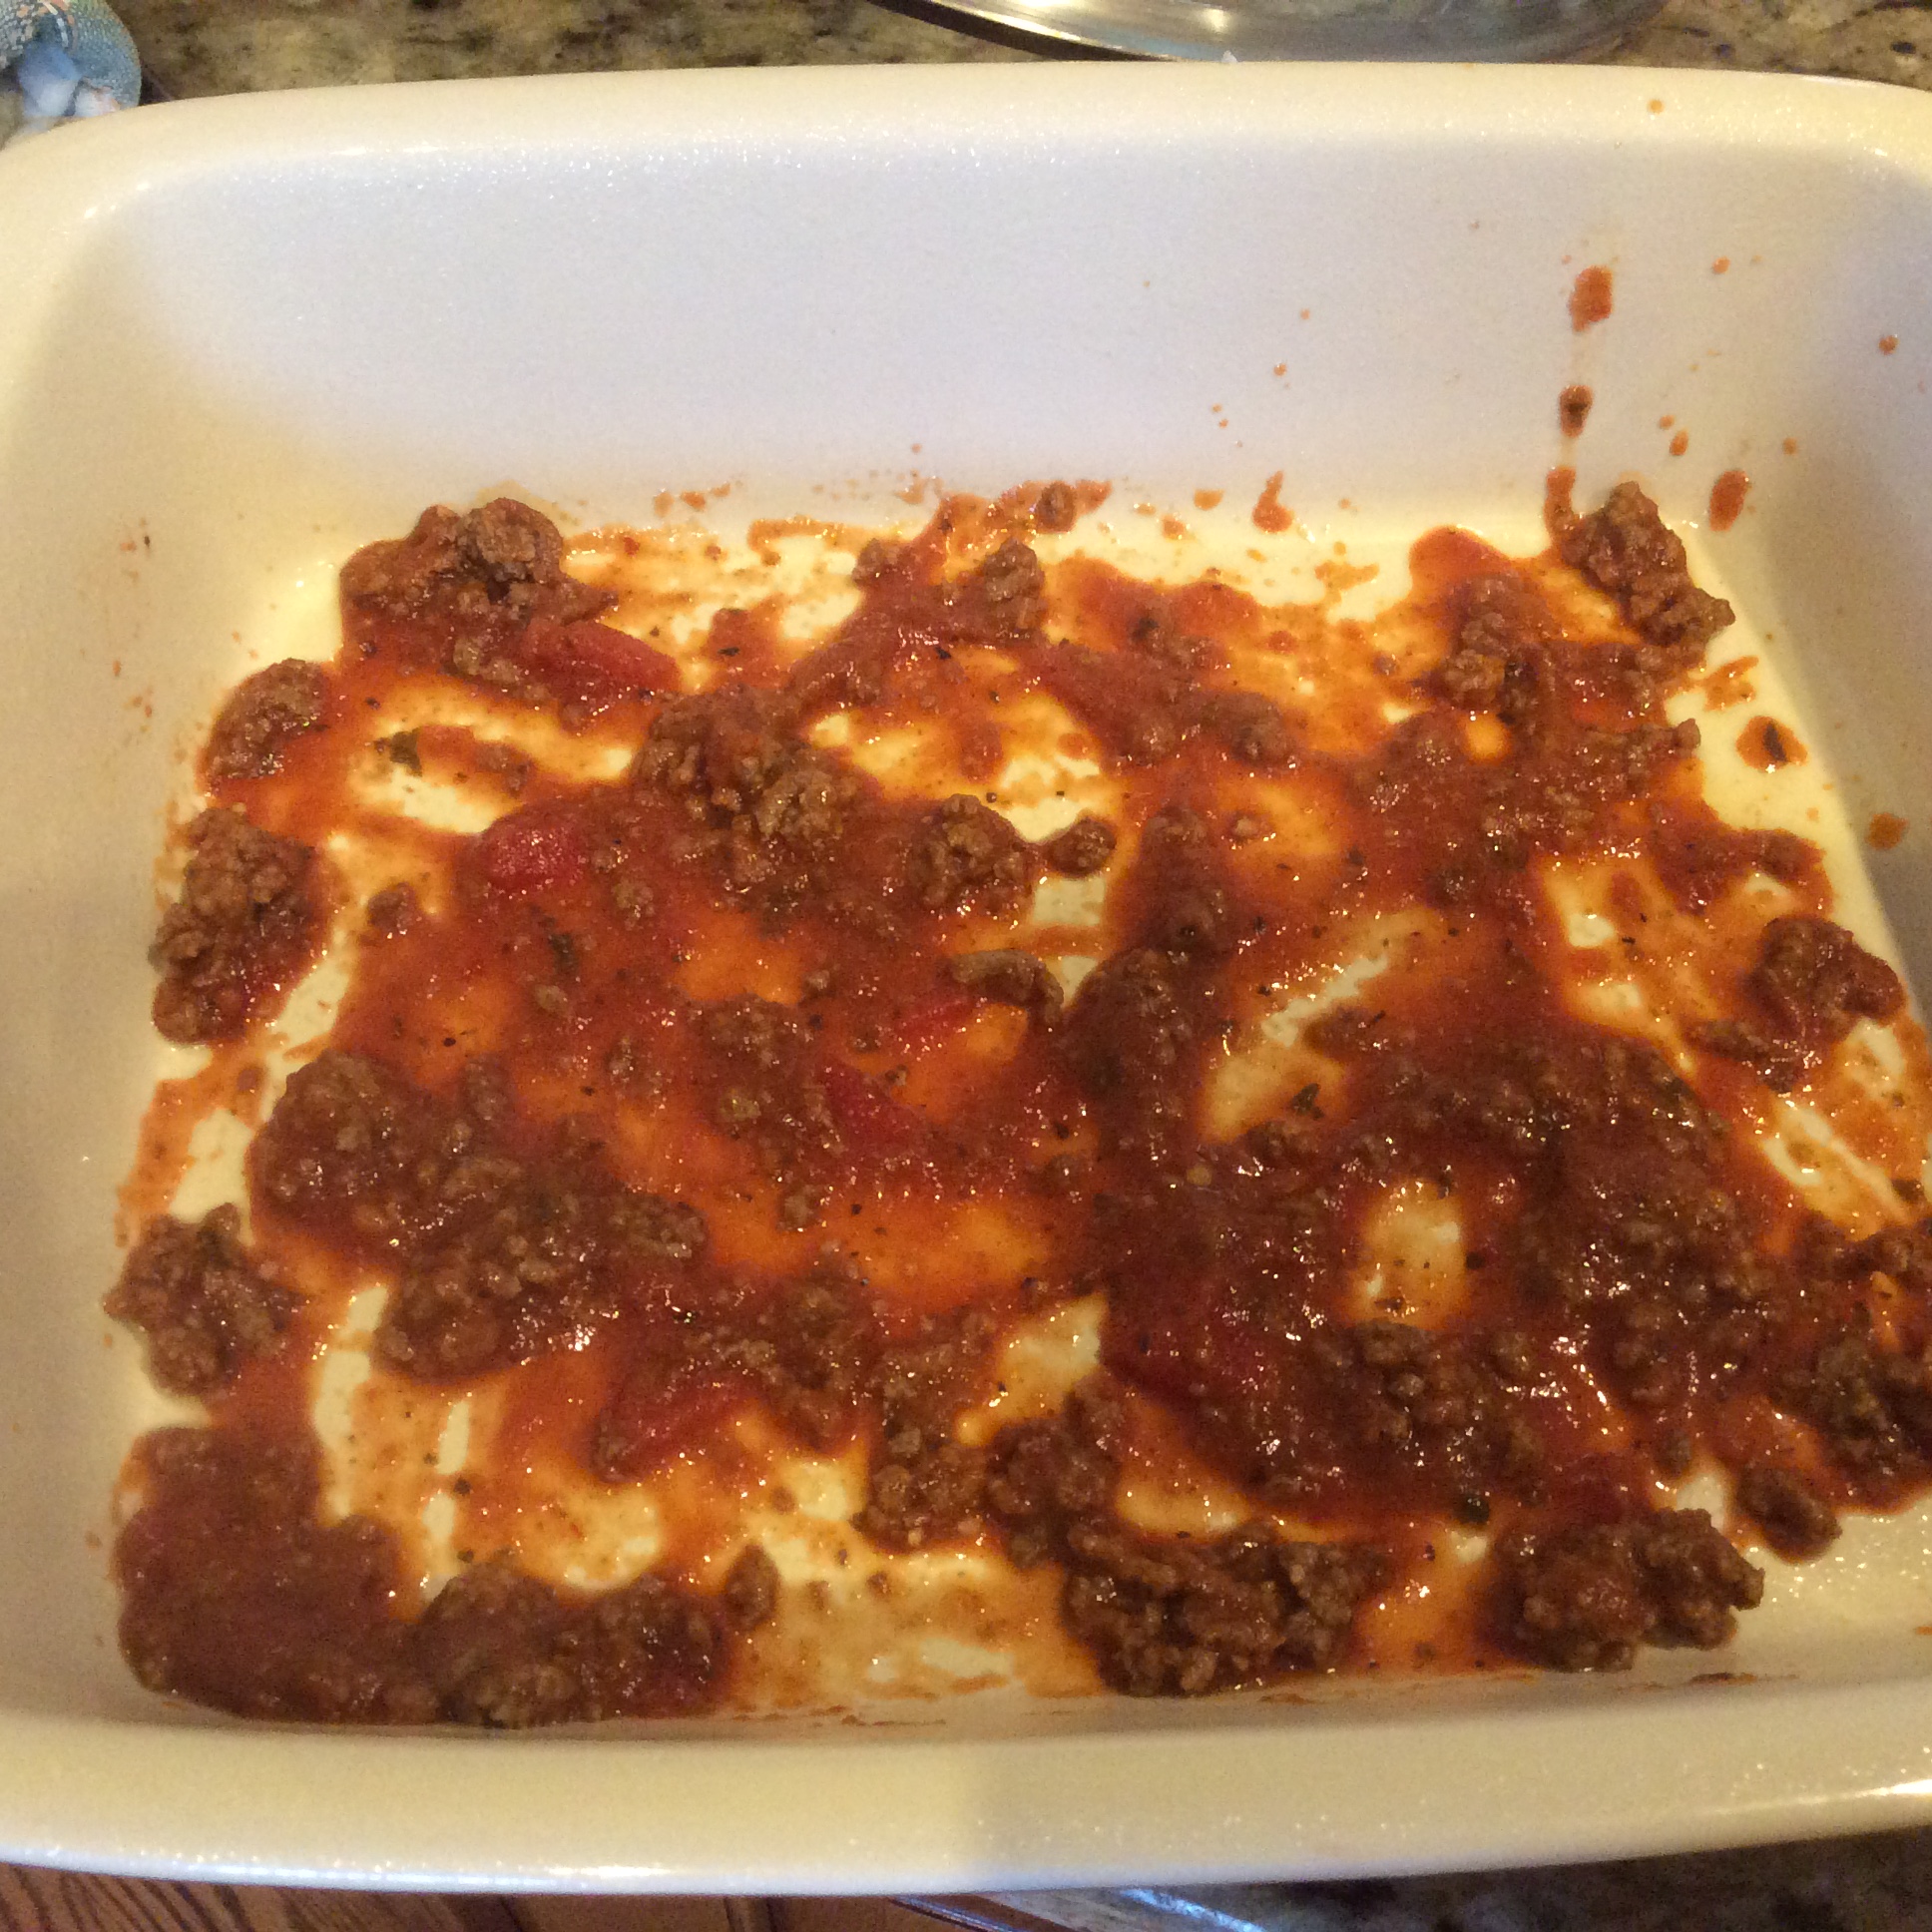 Meat sauce at the bottom of baking dish